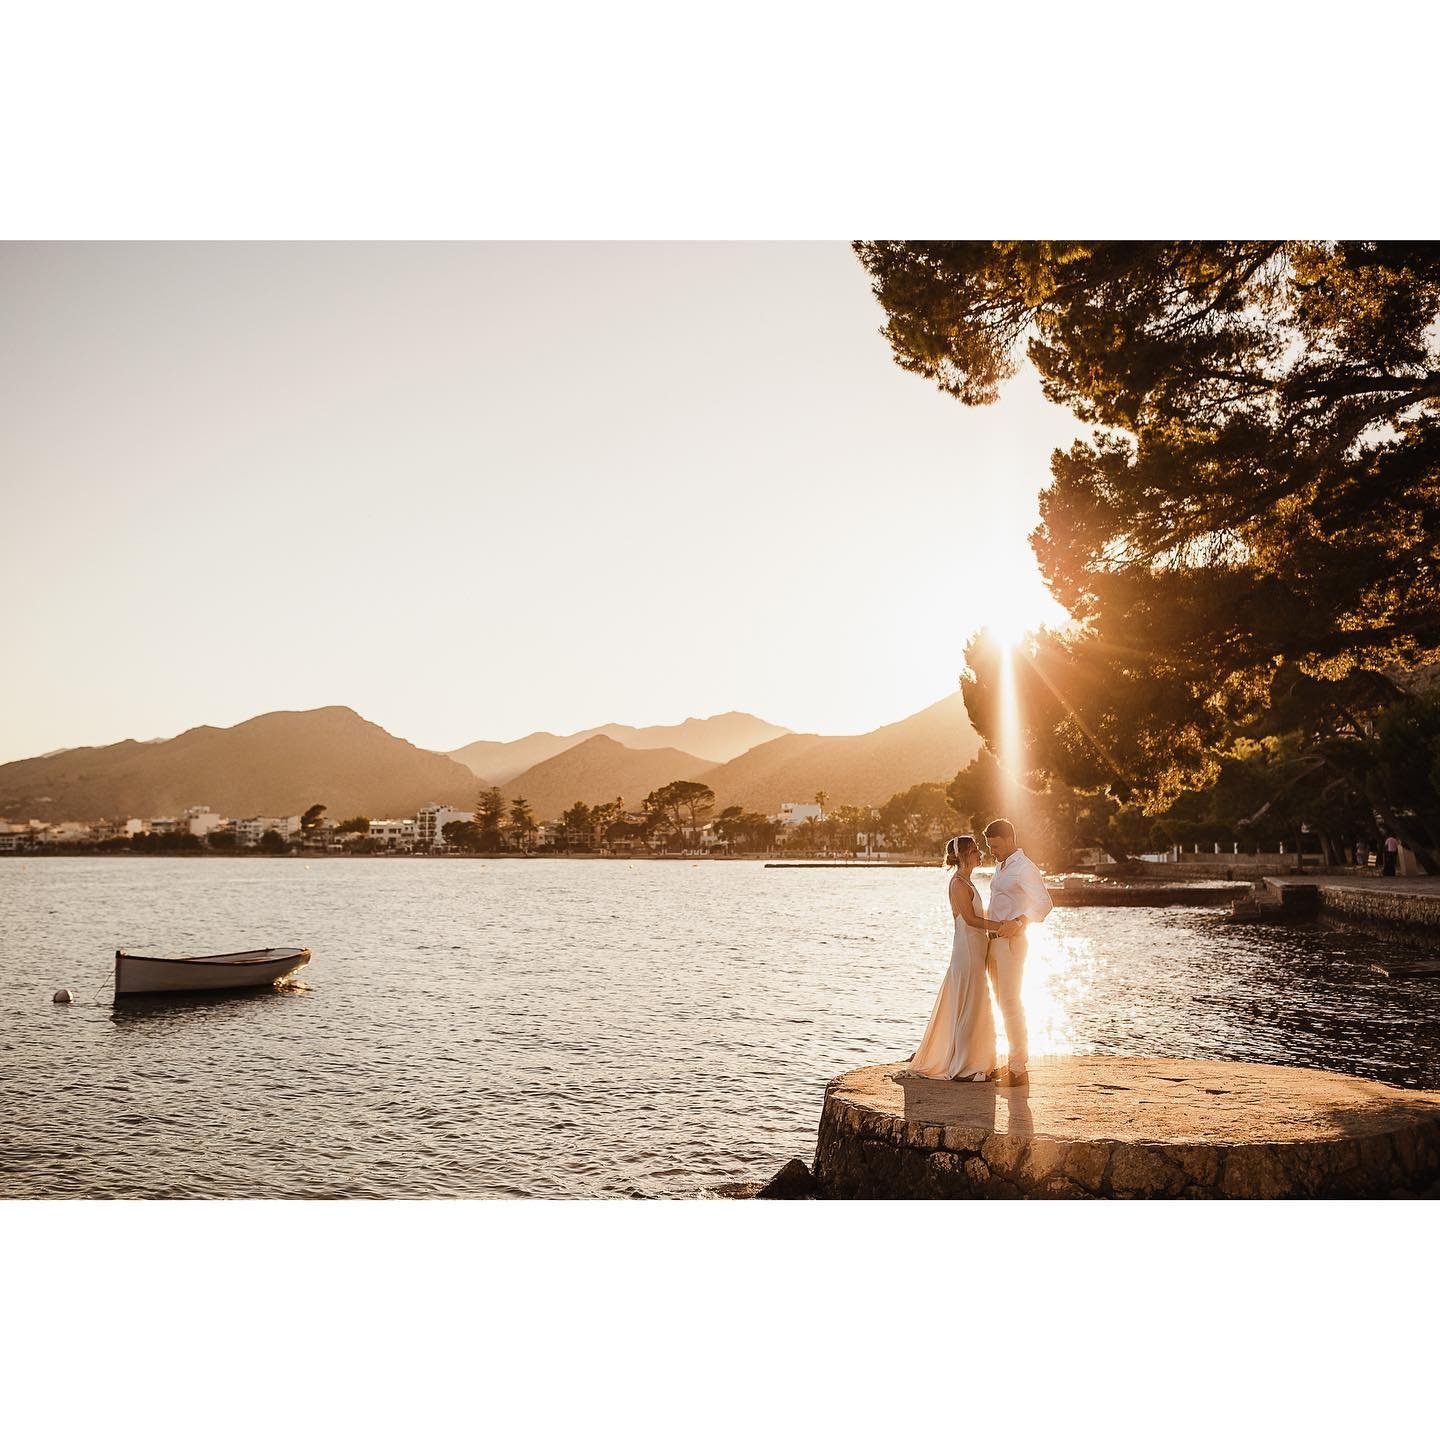 Sophie &amp; Luke&rsquo;s Mallorca wedding is currently featured on my blog, link in profile bio @photography_34 to see more // really looking forward to returning to the same venue next year!
.
.
Venue - @illador
Boutique - @theaislebridal
Dress - @